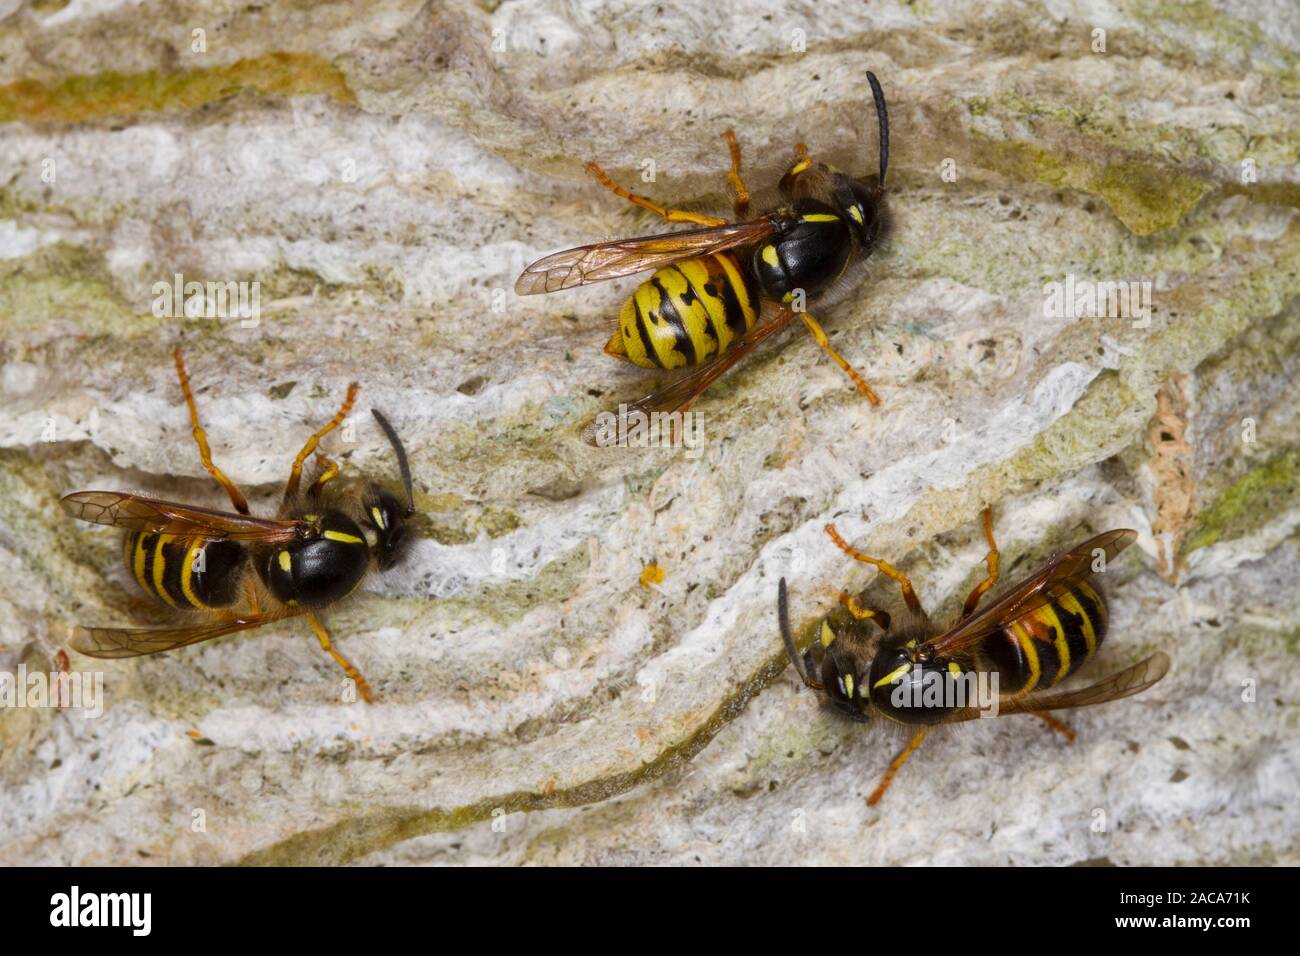 Norwegian wasp (Dolichovespula norwegicus) adult workers enlarging the nest with chewed wood pulp 'paper'. Powys, Wales. June. Stock Photo